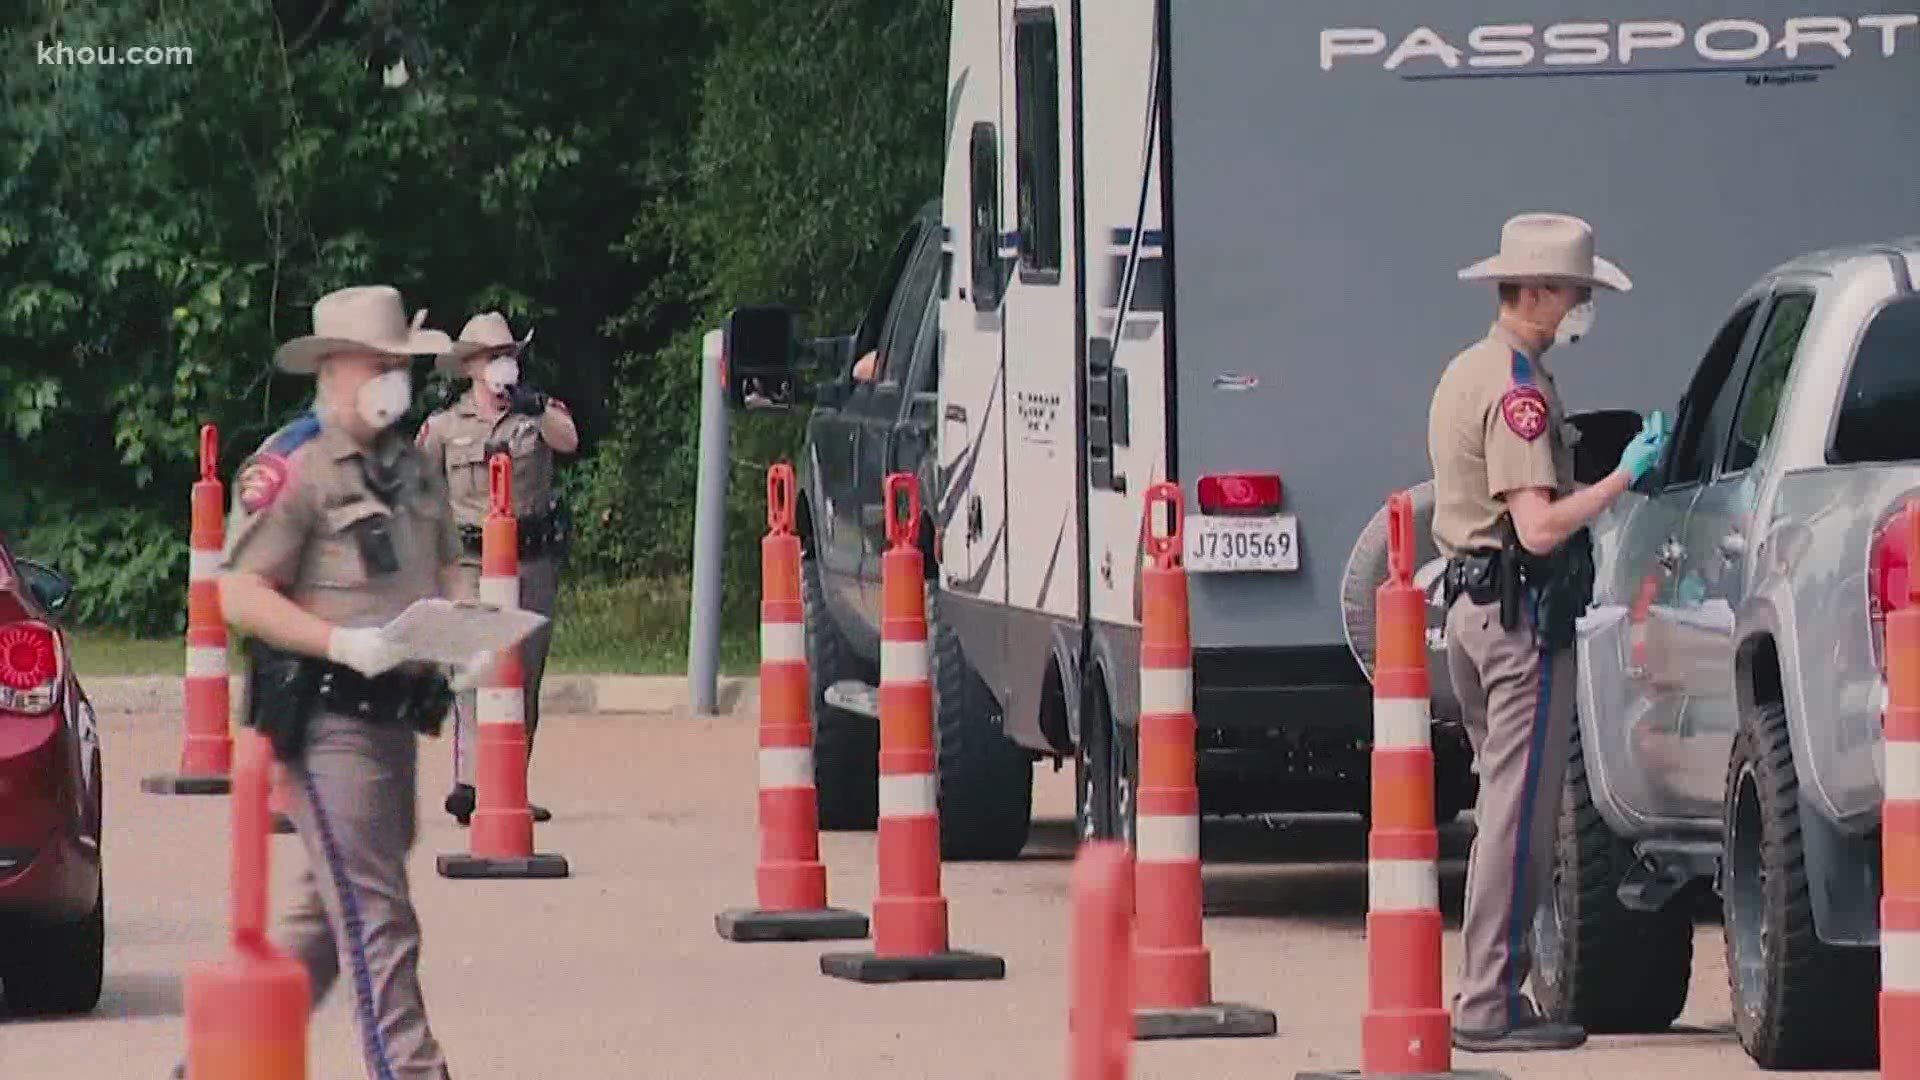 After New Orleans became a coronavirus hot spot, Texas state troopers were sent to the border to screen travelers. KHOU 11 Investigates analyzed the checkpoint data.